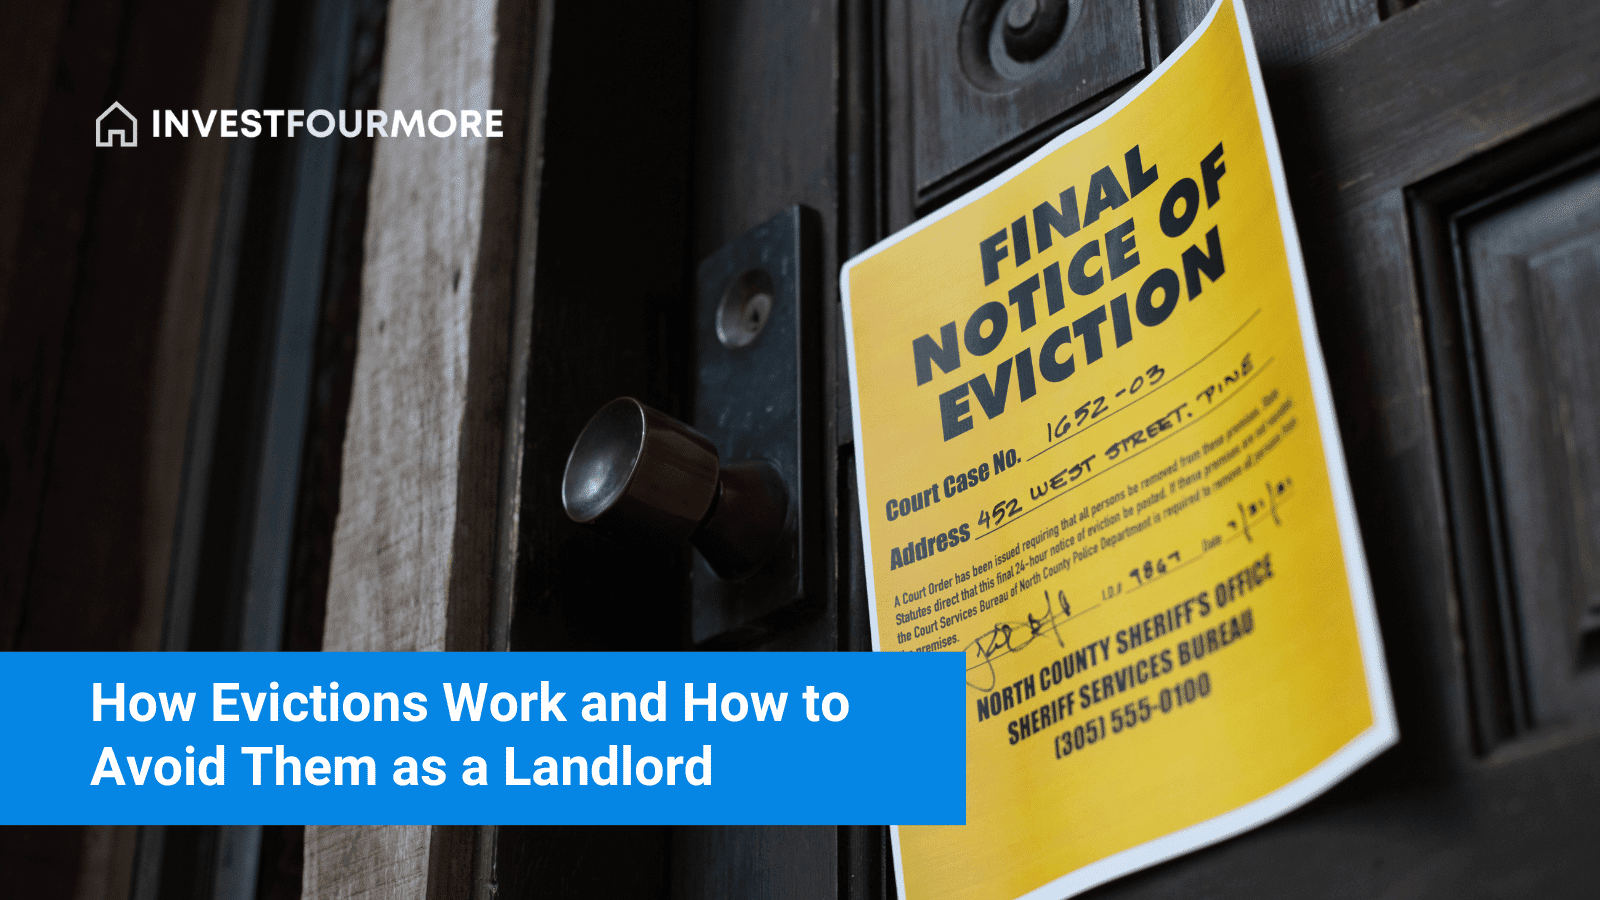 How Evictions Work and how to Avoid them as a Landlord